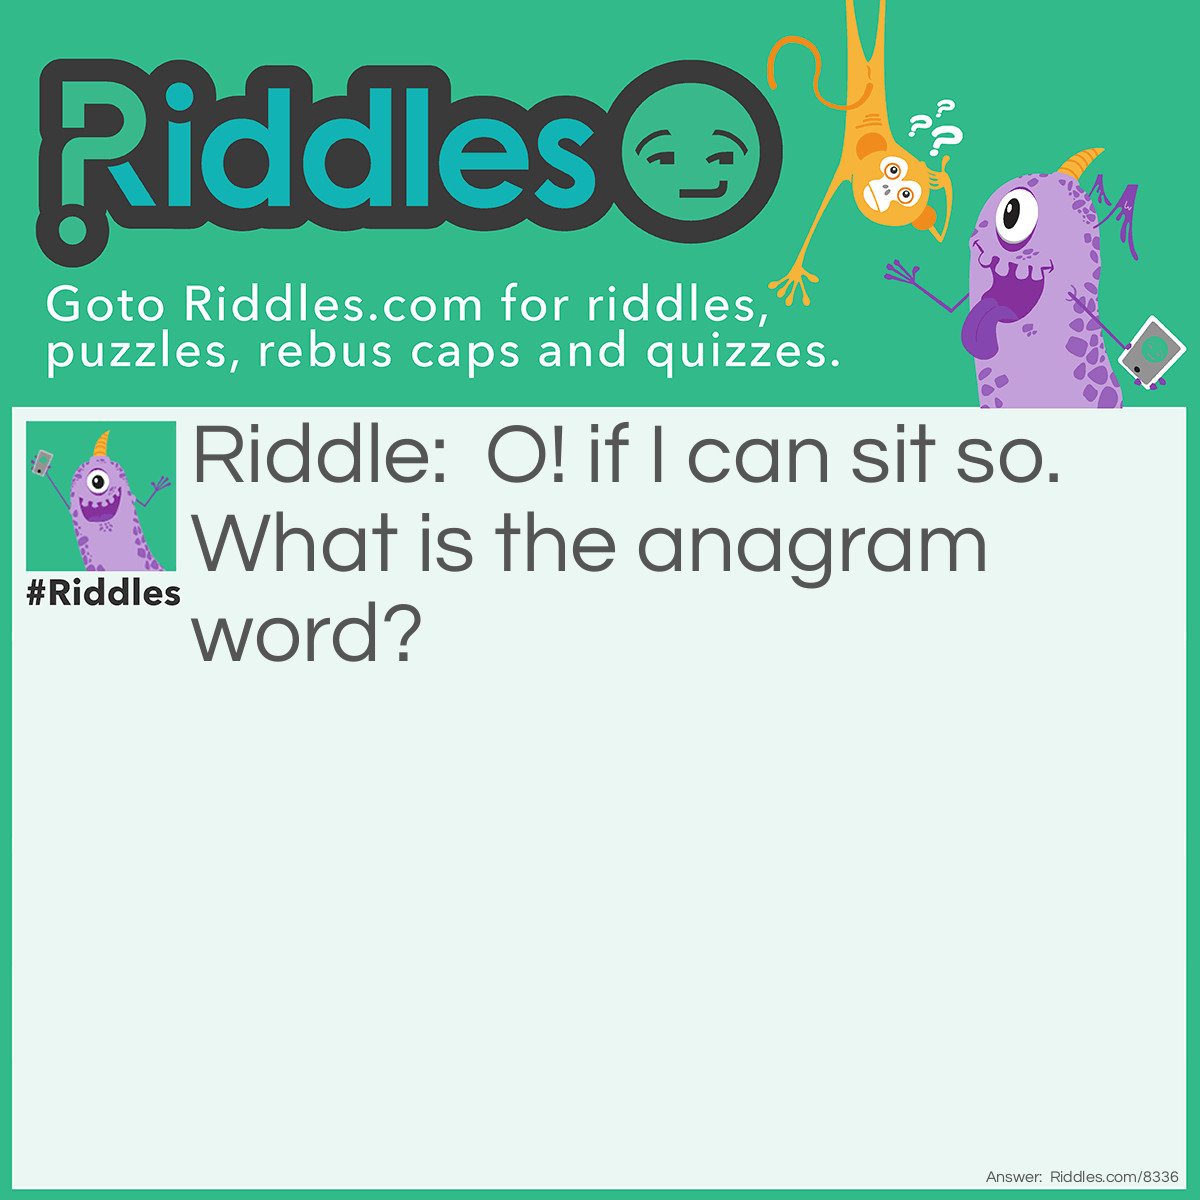 Riddle: O! if I can sit so. What is the anagrammed word? Answer: Ossification.